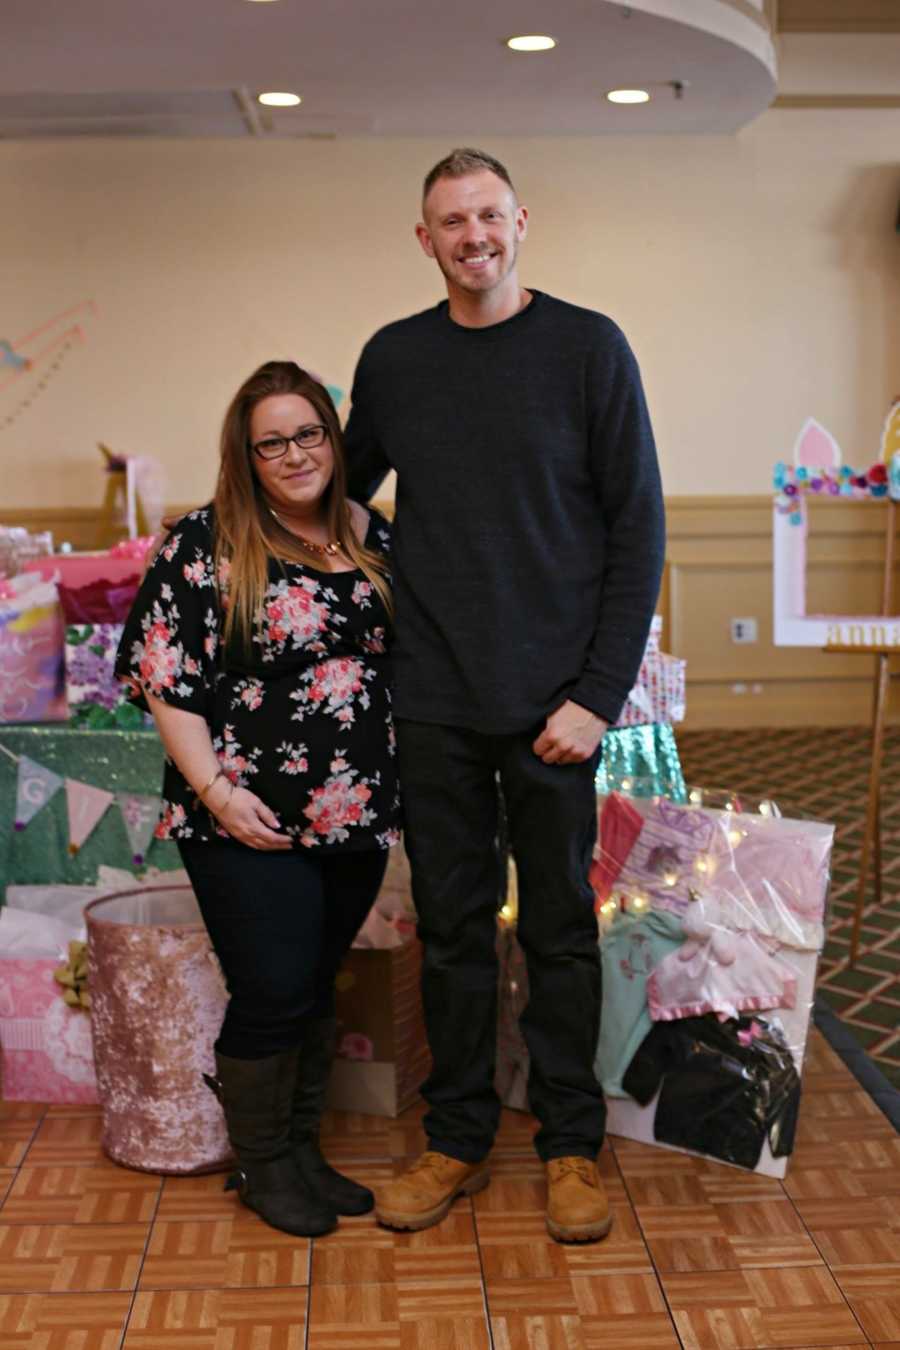 Pregnant woman stands beside her husband at their gender reveal party